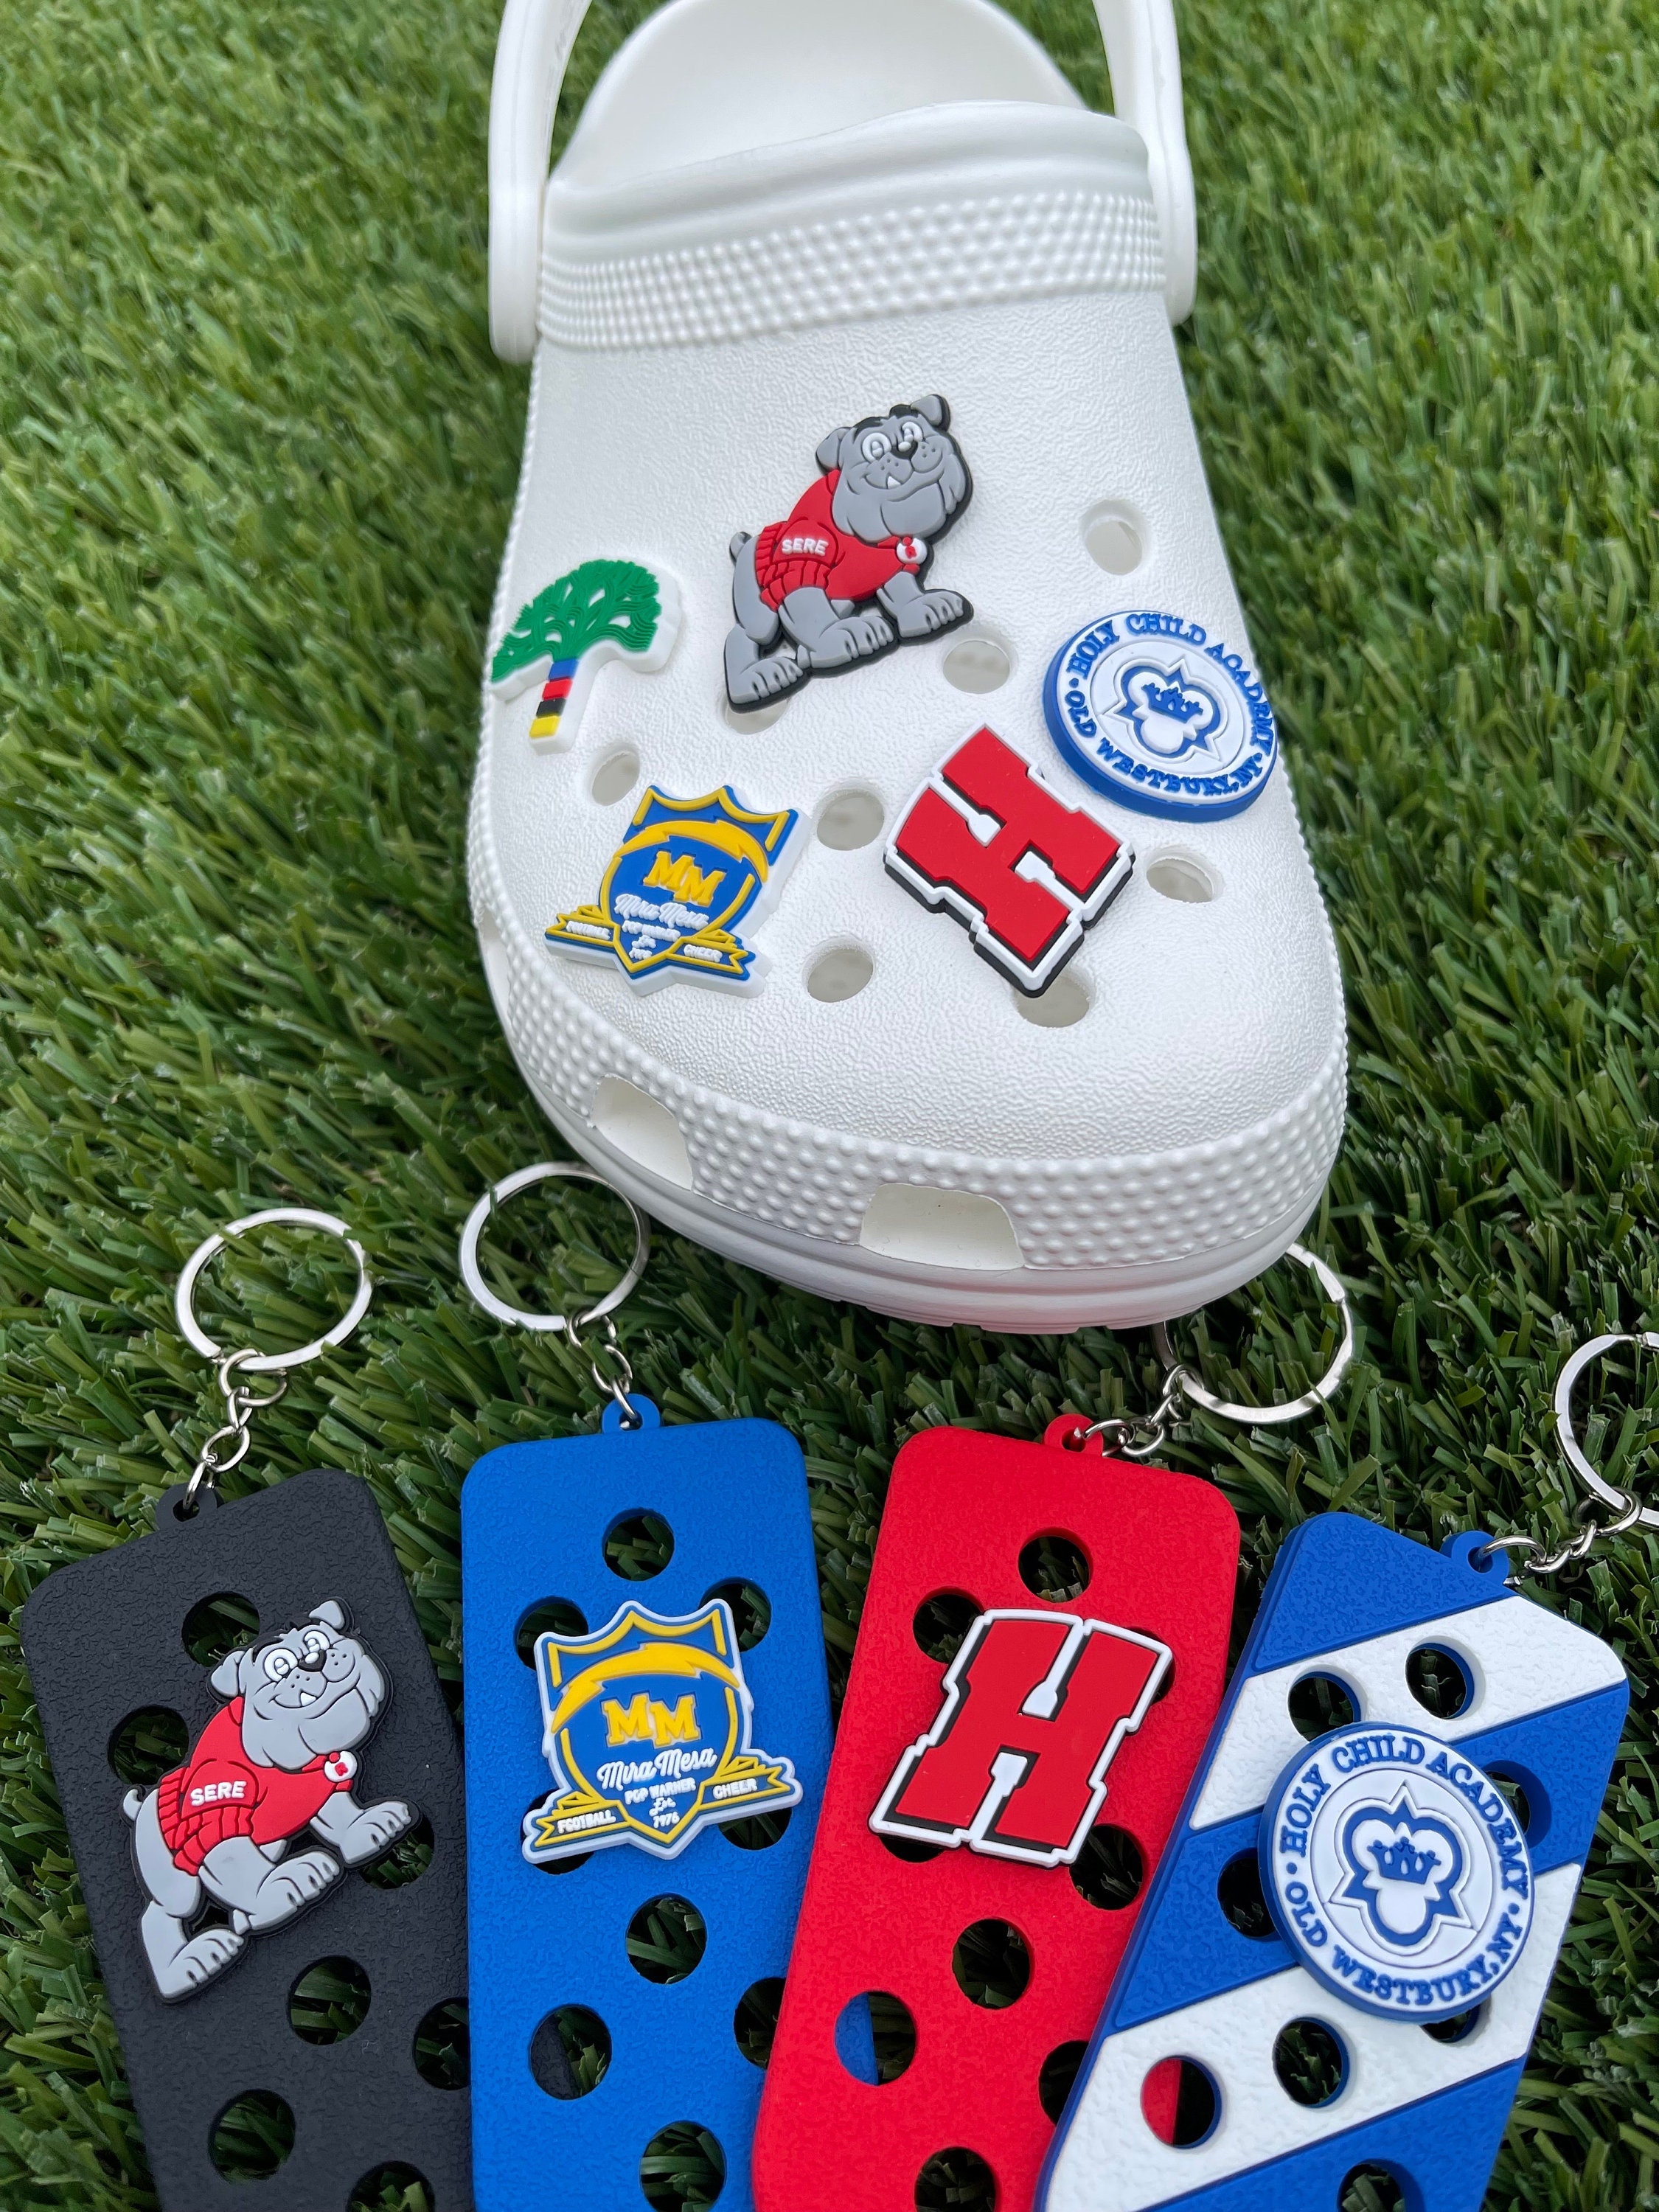 Mira Medals - Check out these awesome Croc Charms we produced for our  client! They are so cool. Hit us up for your very own custom croc charms.  Great for artists, fundraisers